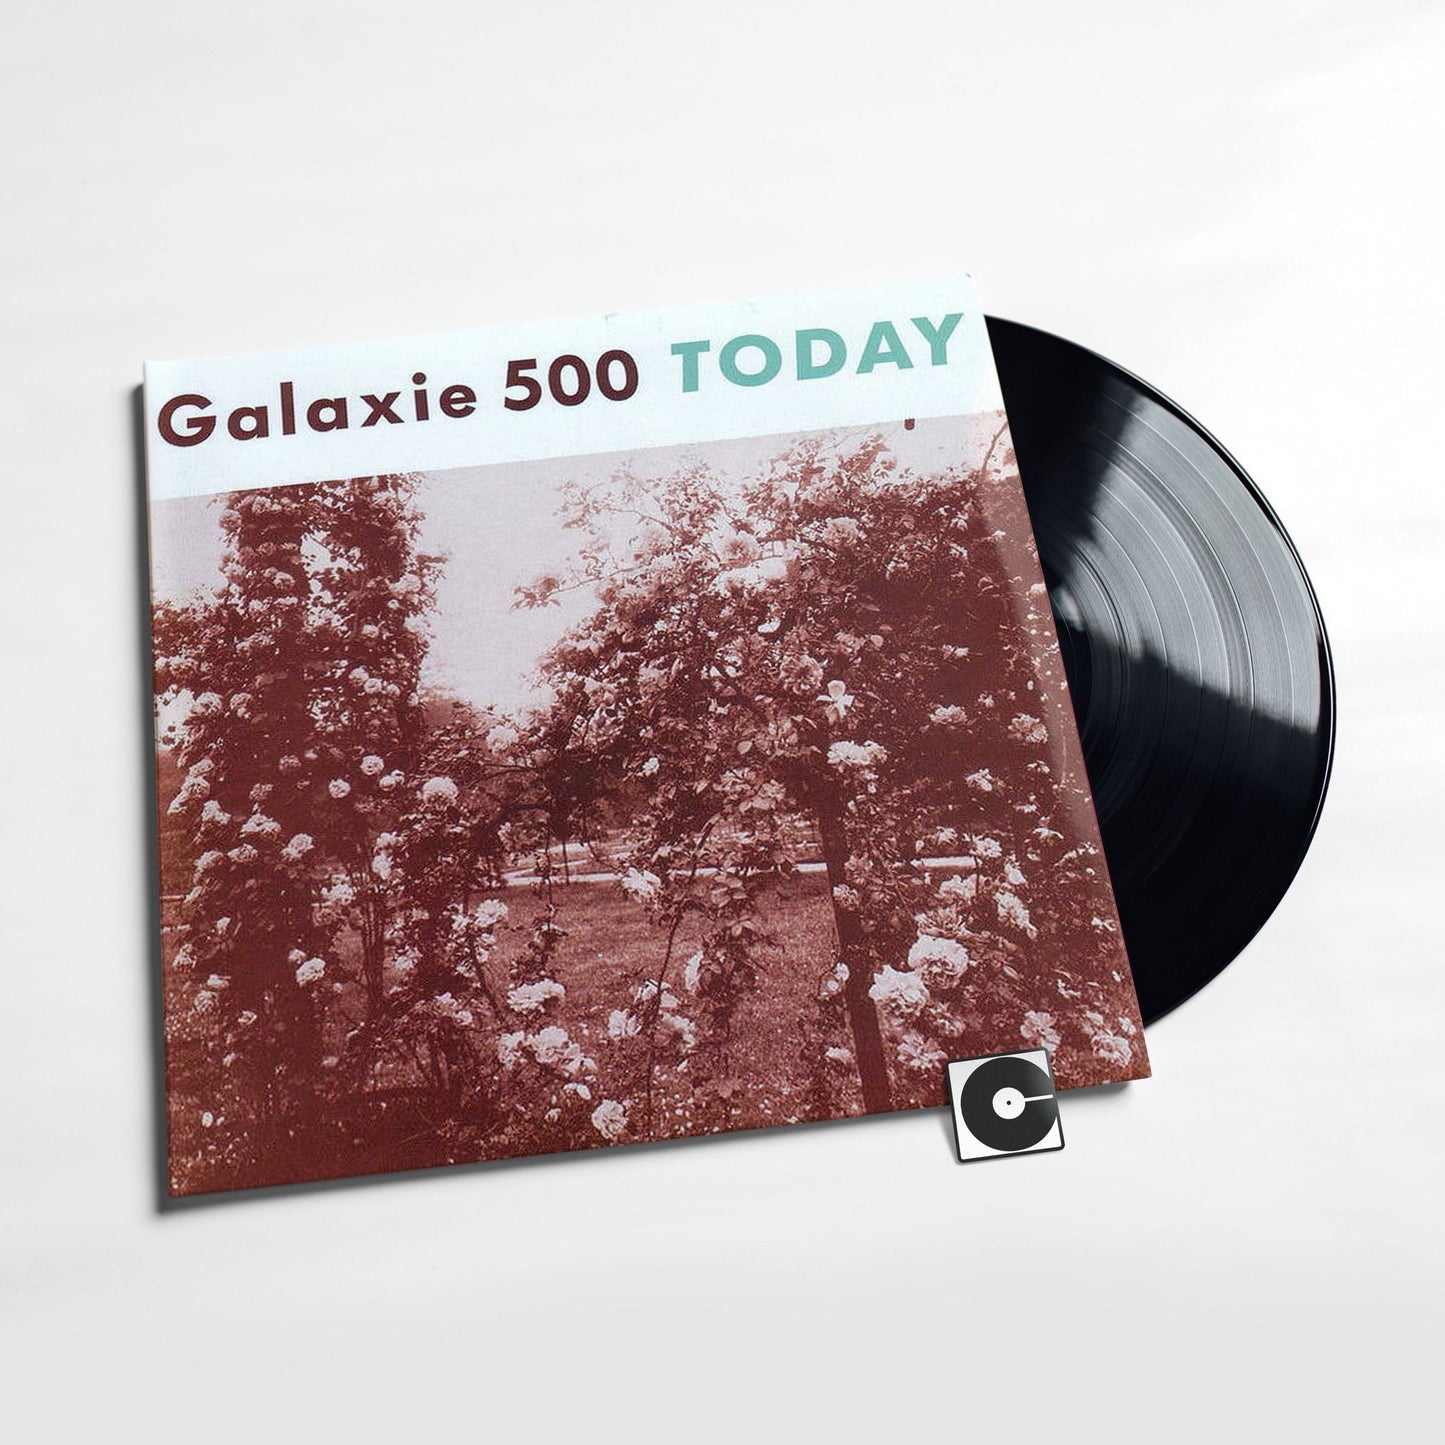 Galaxie 500 - "Today"